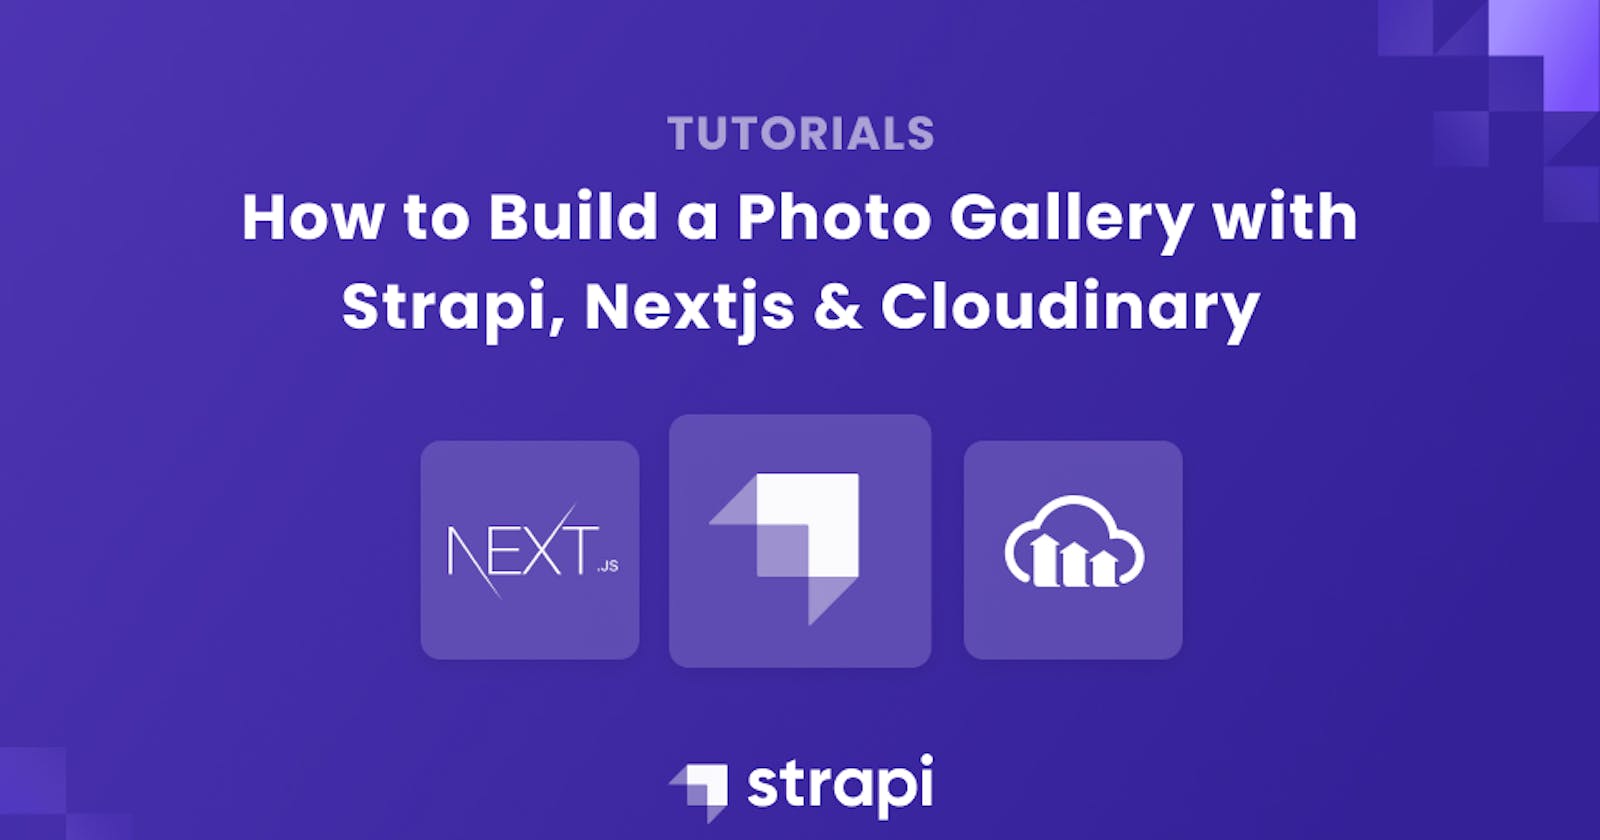 How to Build a Photo Gallery with Strapi, Nextjs and Cloudinary